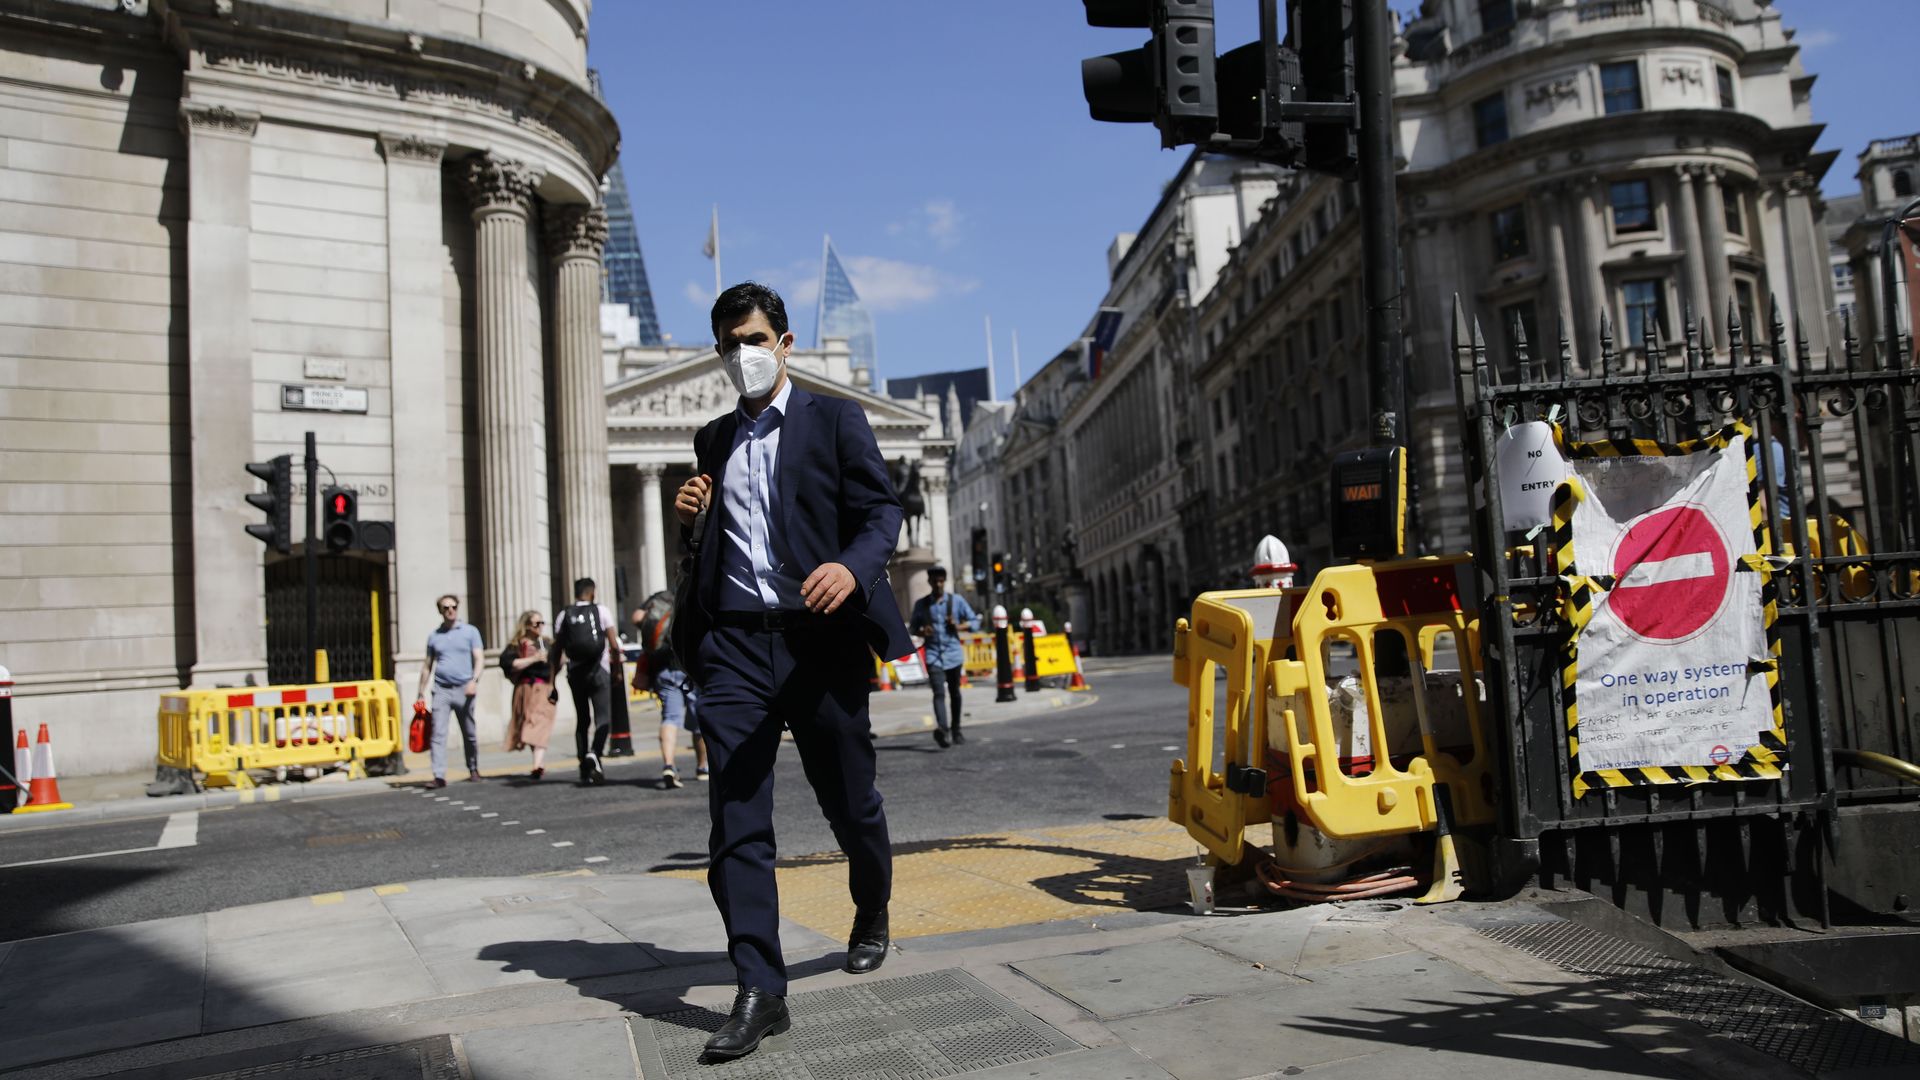 A man wearing a face mask walks near the Royal Exchange and the Bank of England in the City of London on July 17